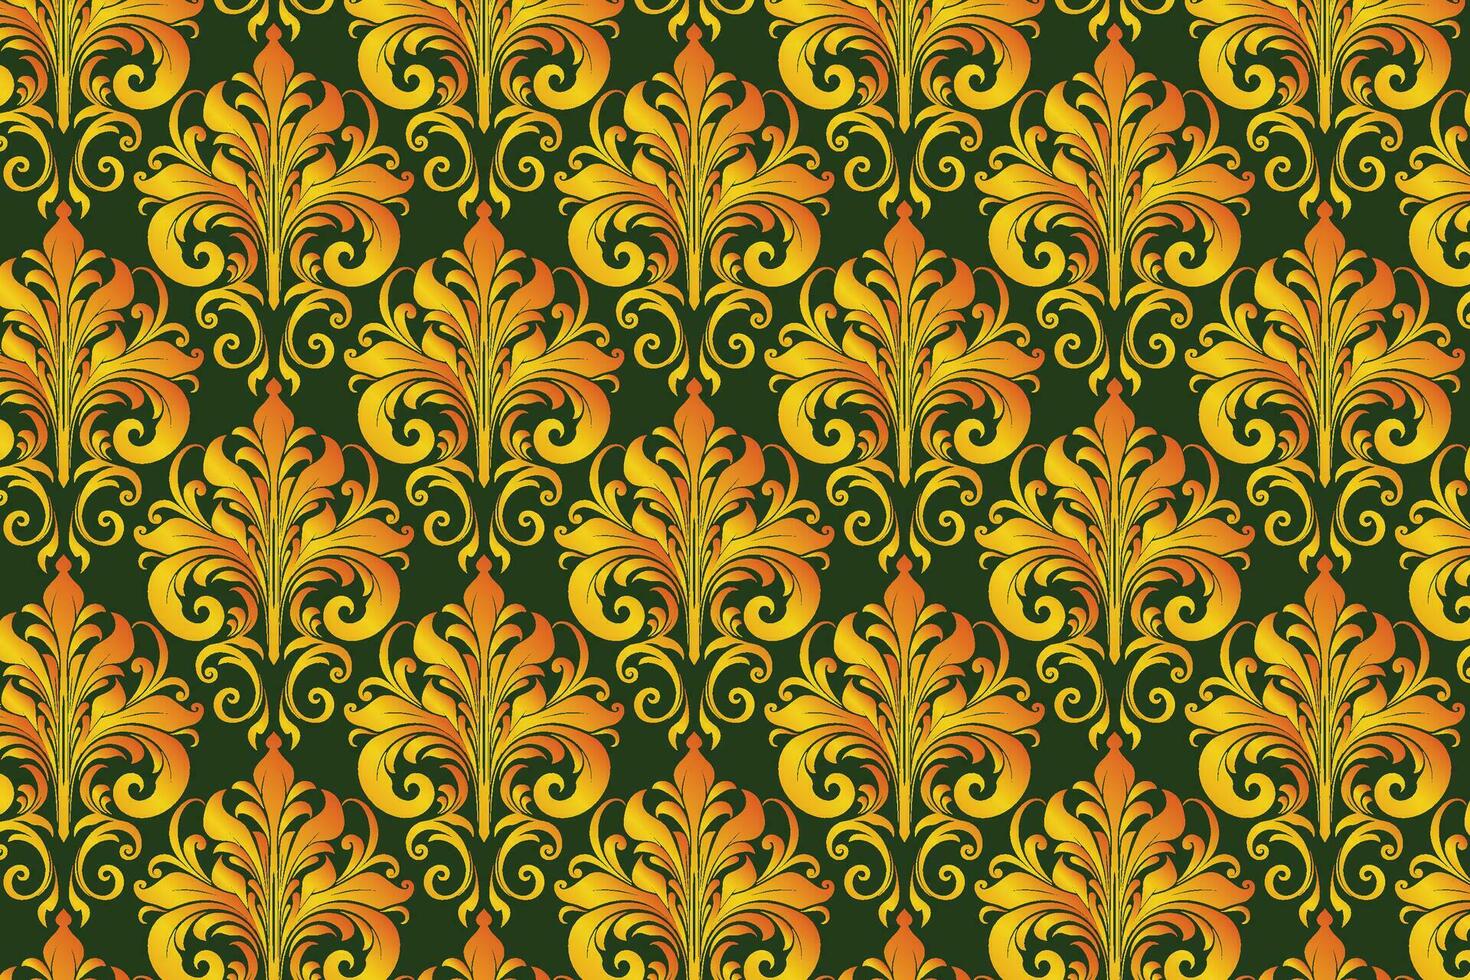 Vintage Yellow and Green Floral Wallpaper with Orange Accents vector